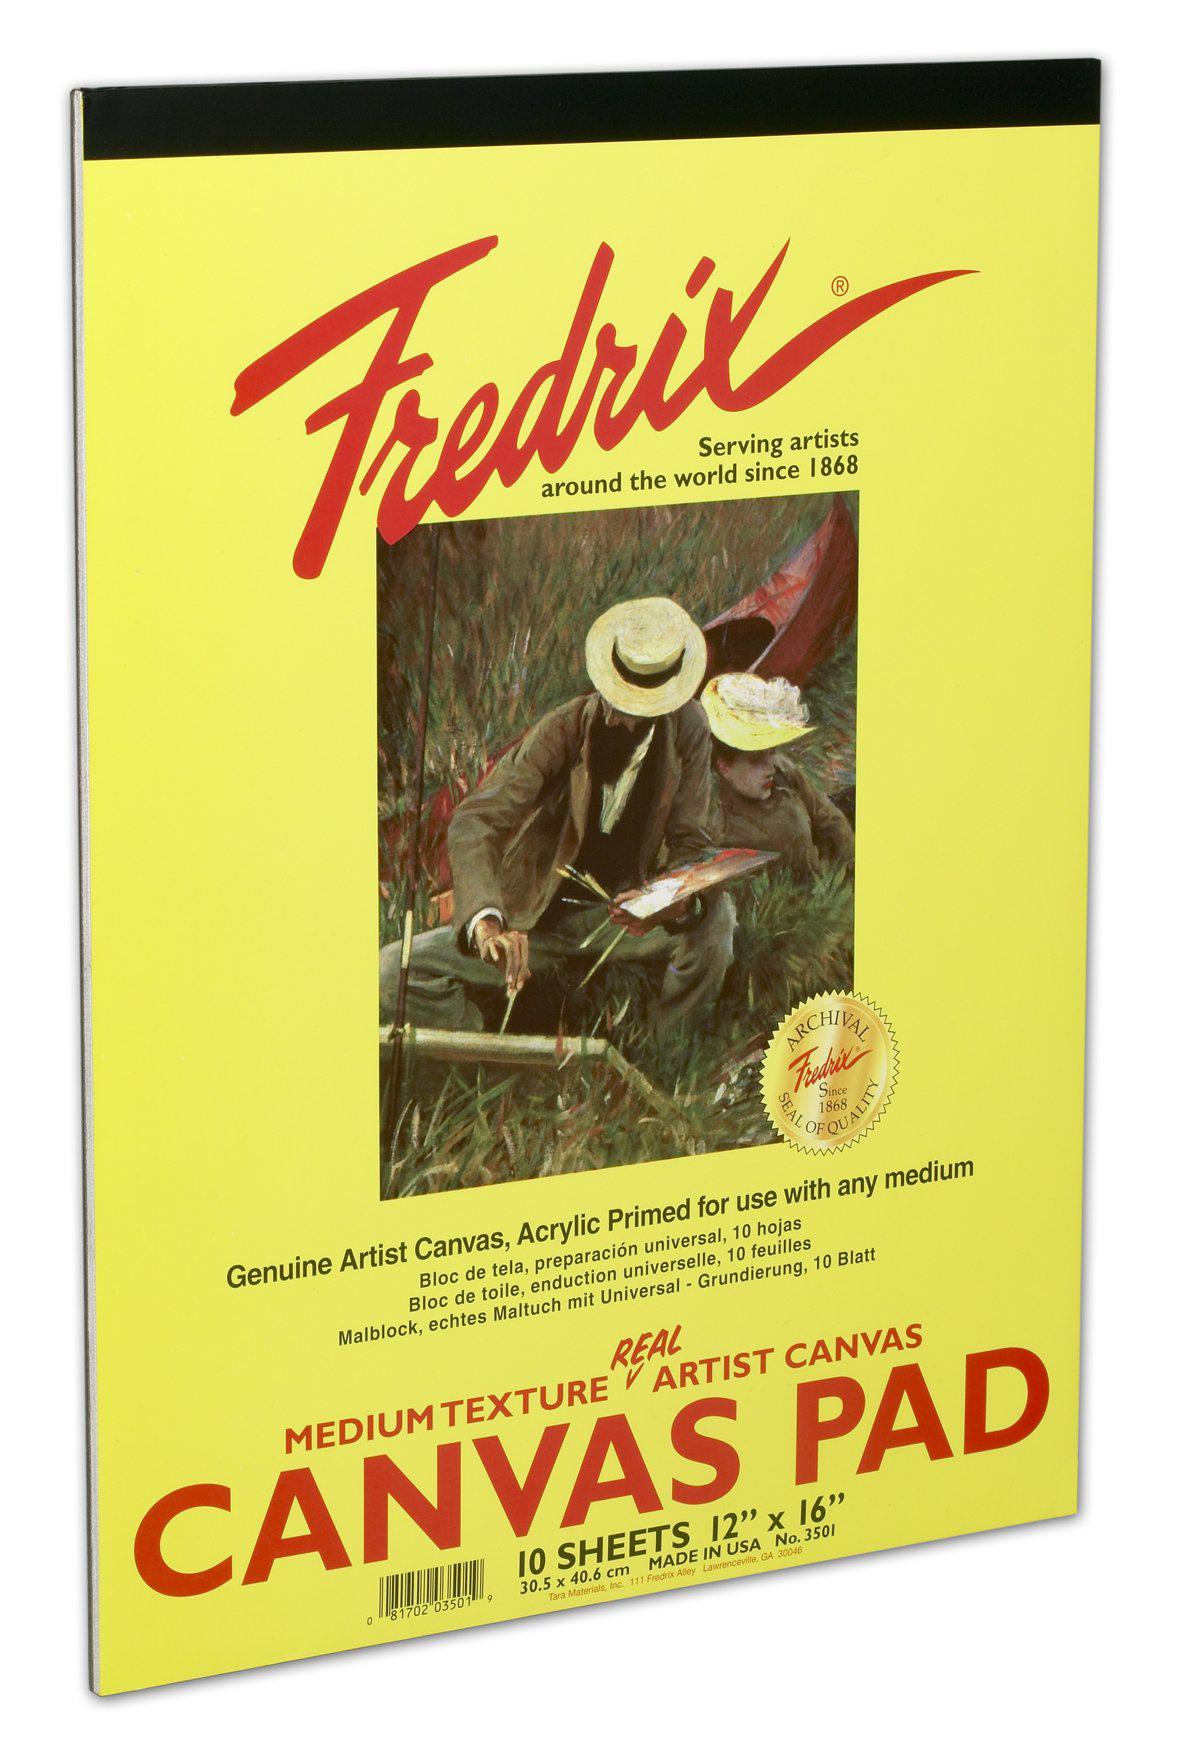 fredrix 3503 white canvas pad, 18" x 24" white canvas, primed and ready for use with any medium, sturdy, can be mounted when 